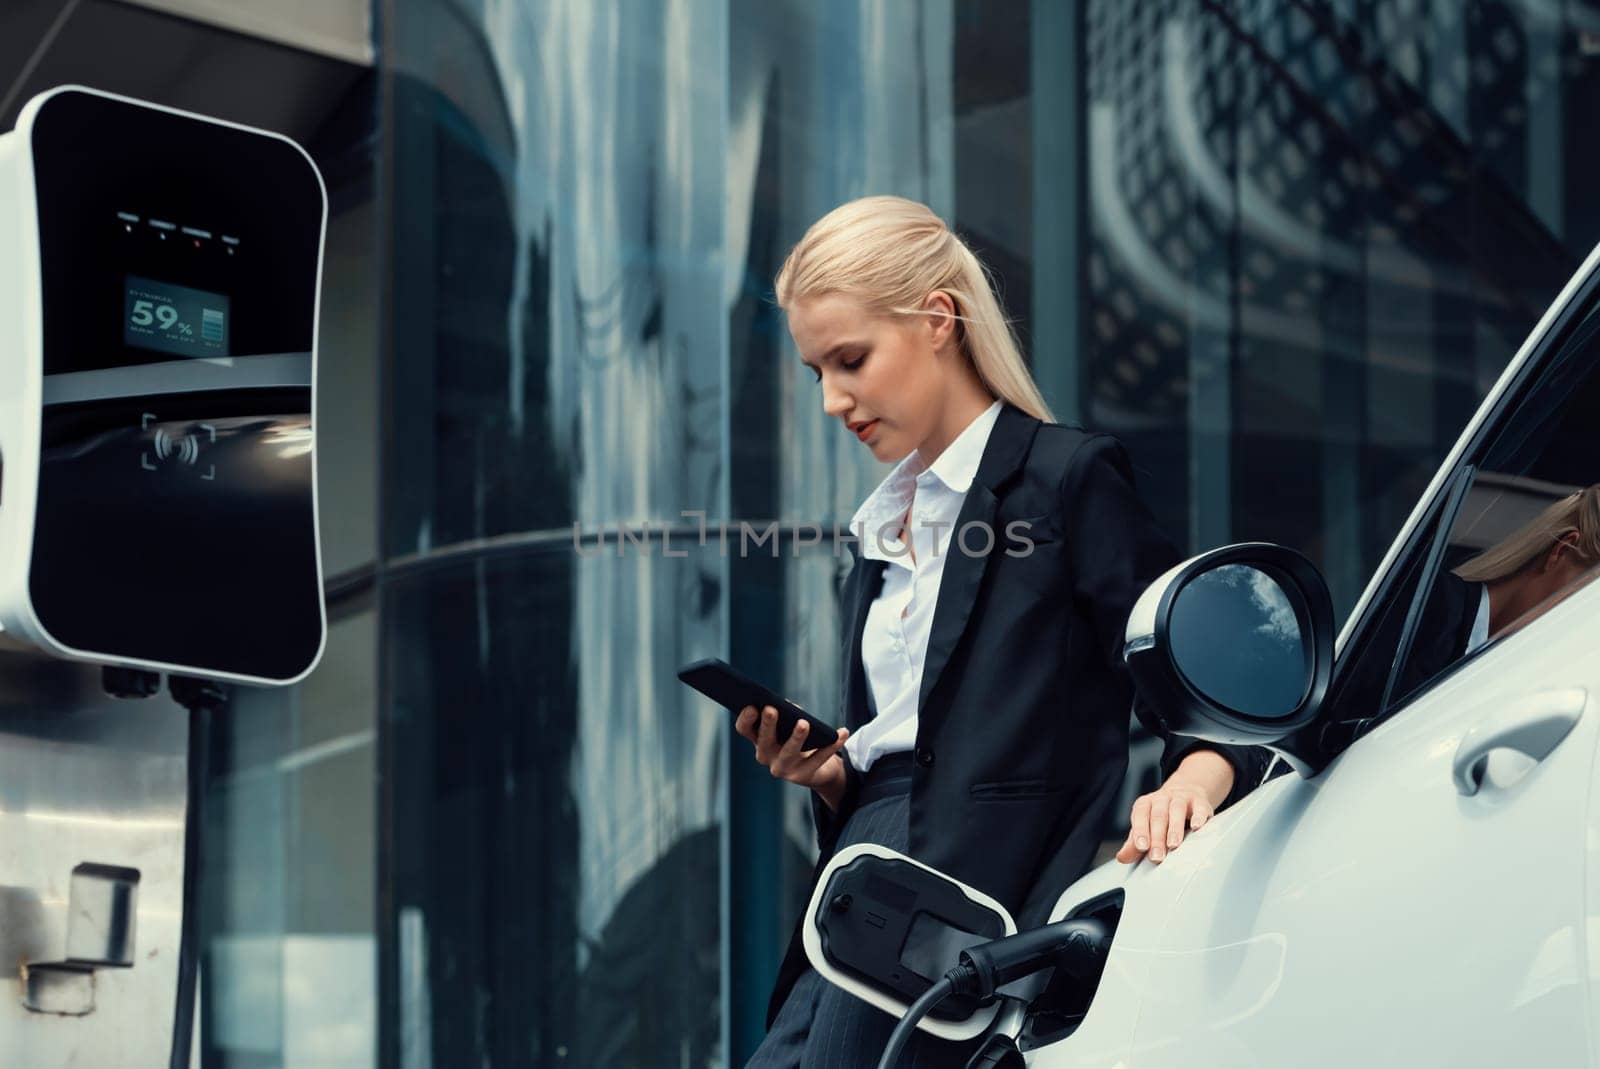 Businesswoman wearing black suit using smartphone, leaning on electric car recharge battery at charging station in city residential building with condos and apartment. Progressive lifestyle concept.